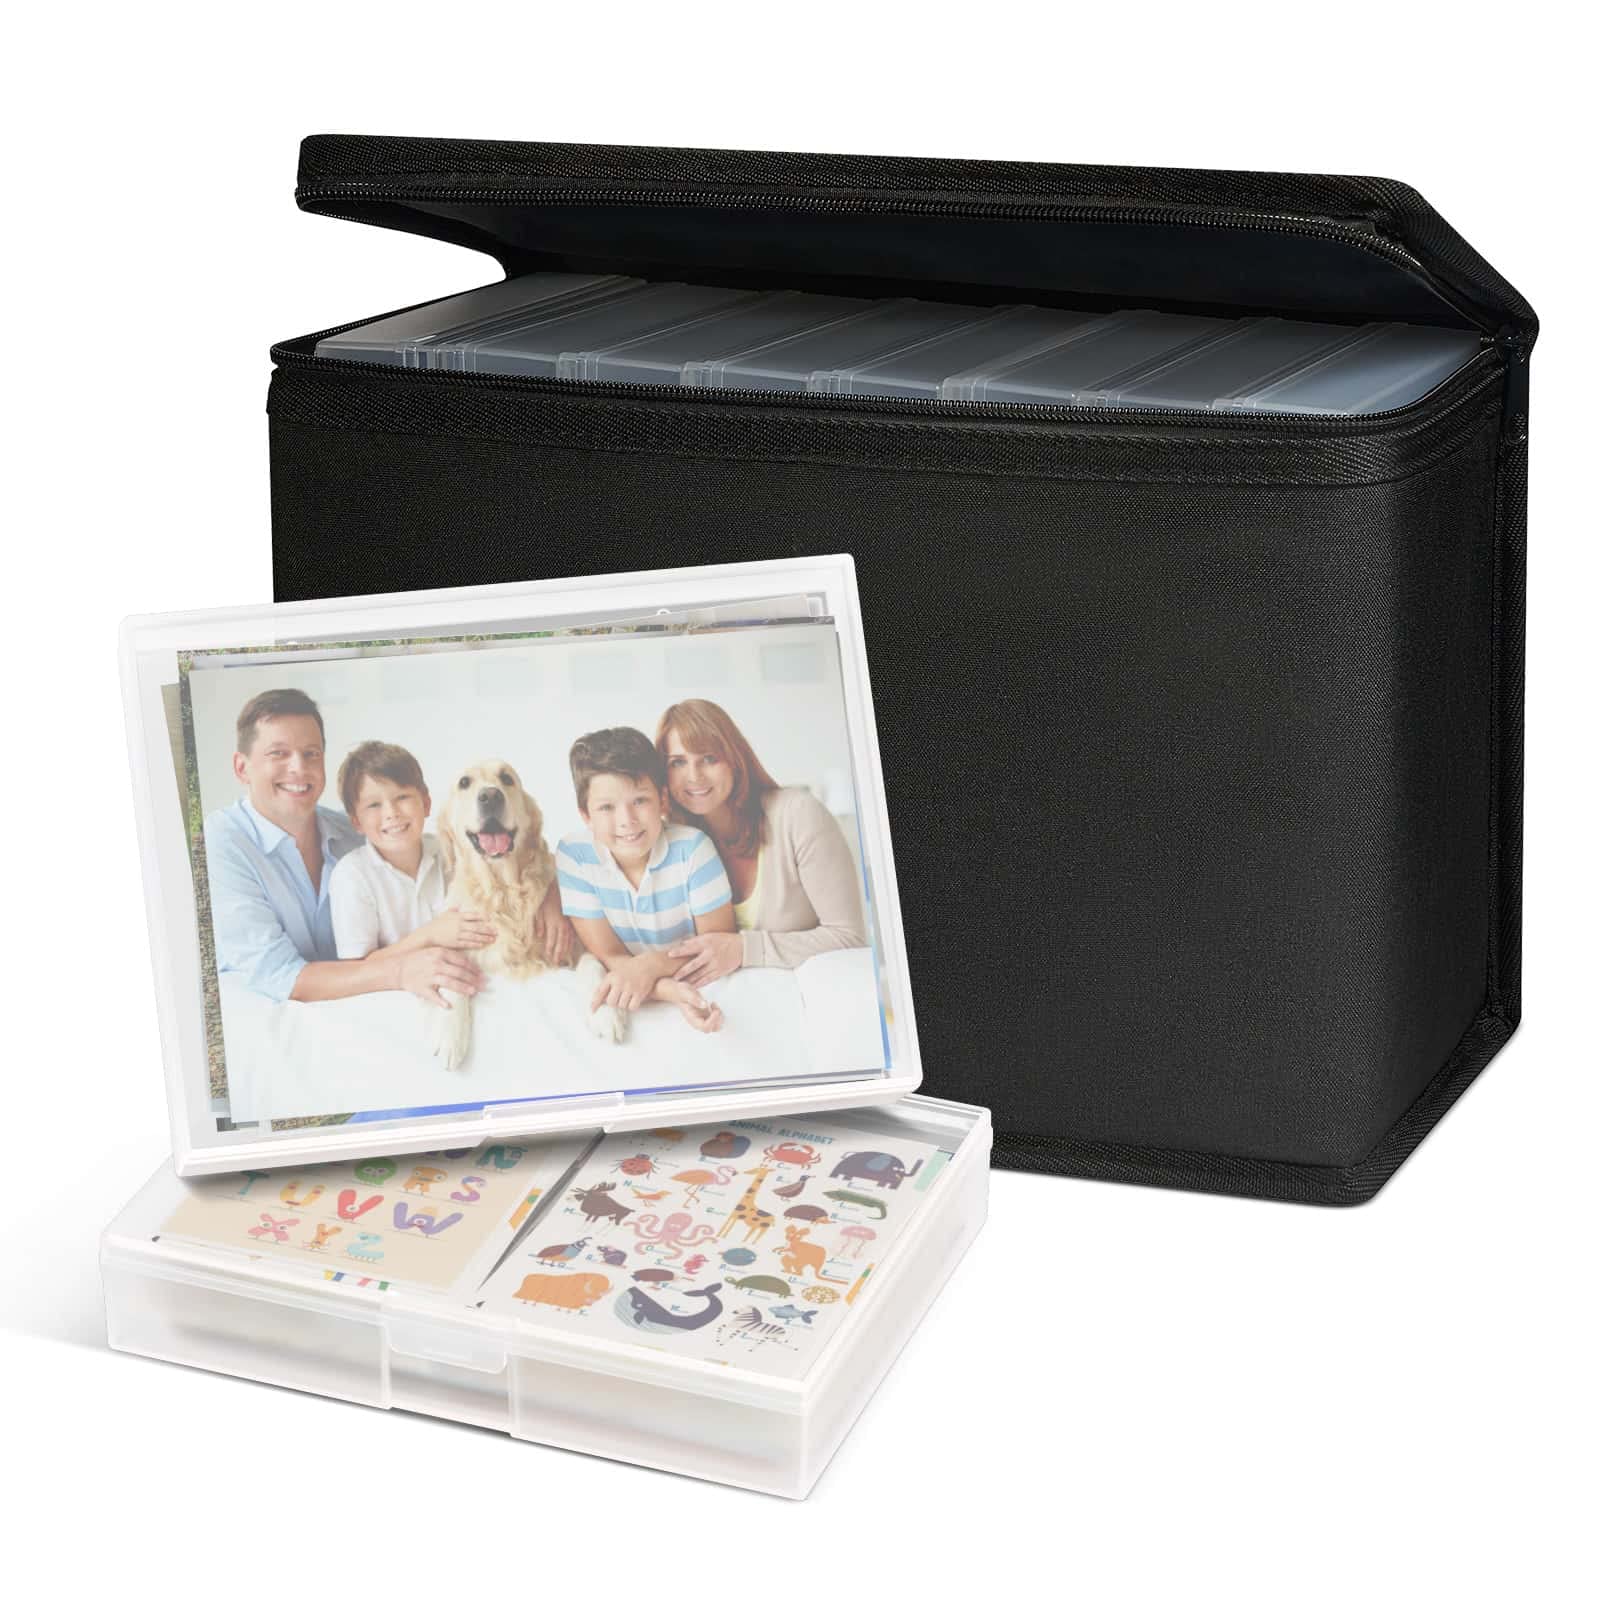 BUG HULL Large 5x7 Photo Storage Box, 8 Inner Photo Cases Store up to